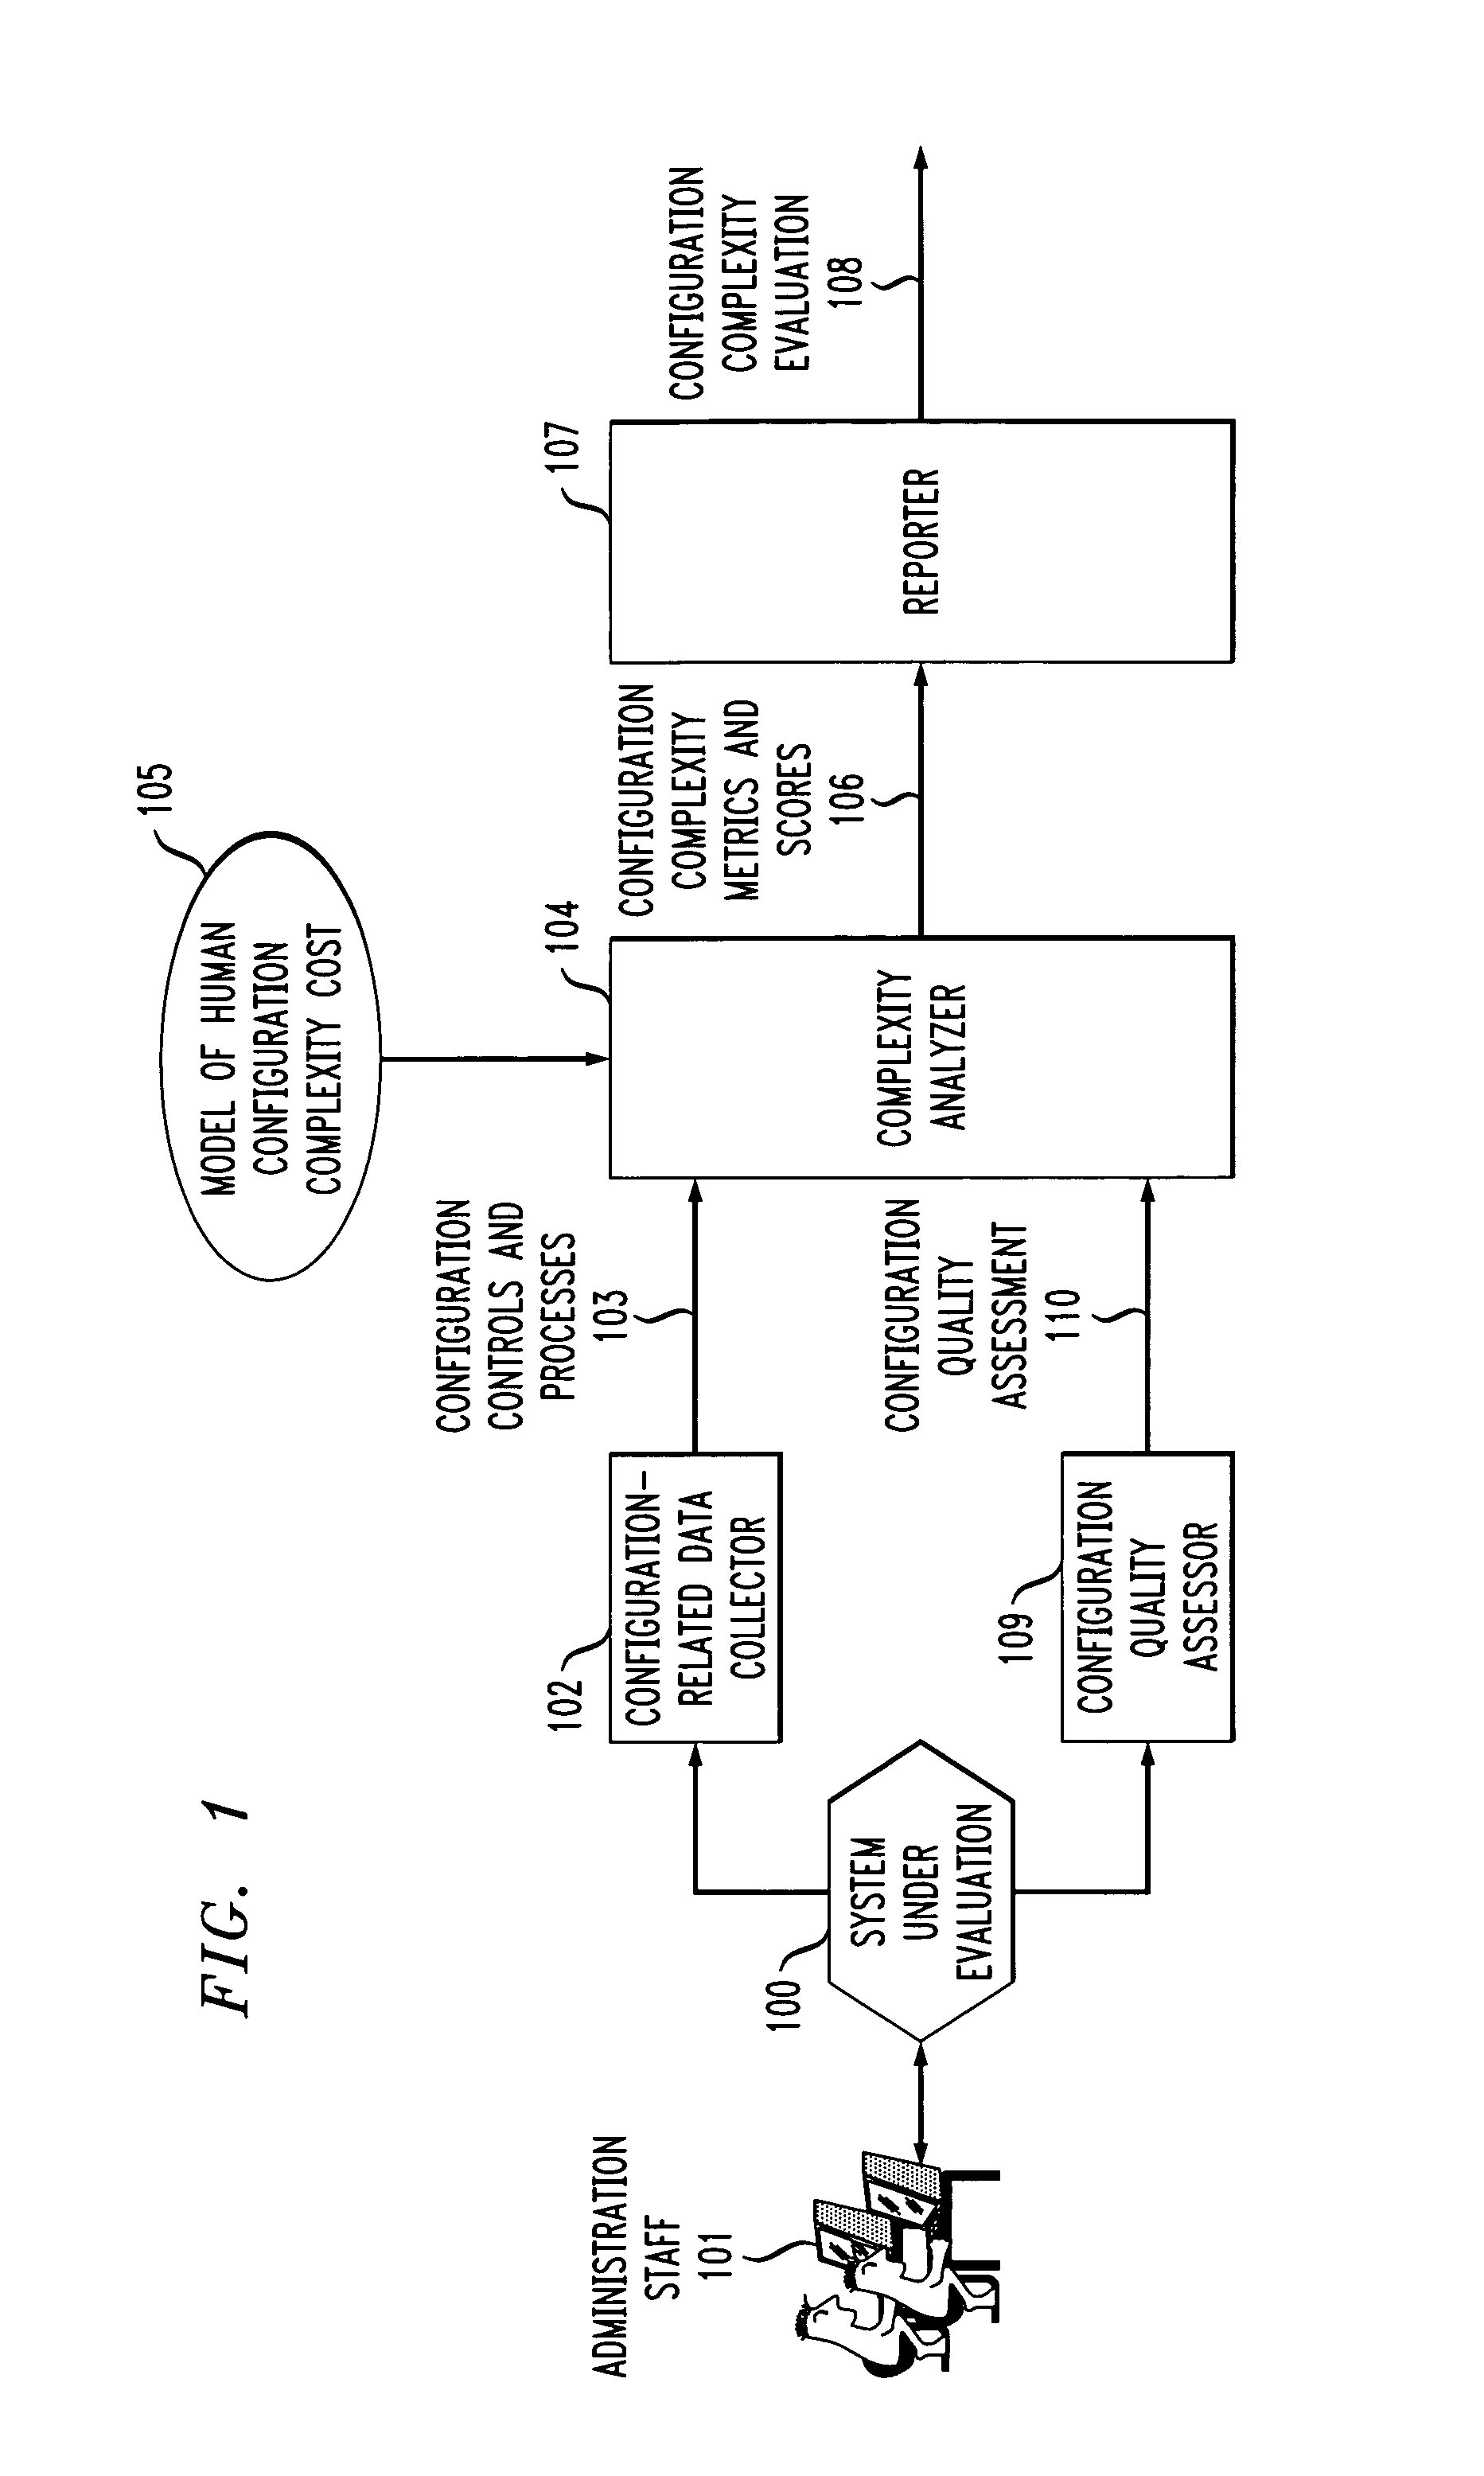 System and methods for quantitatively evaluating complexity of computing system configuration